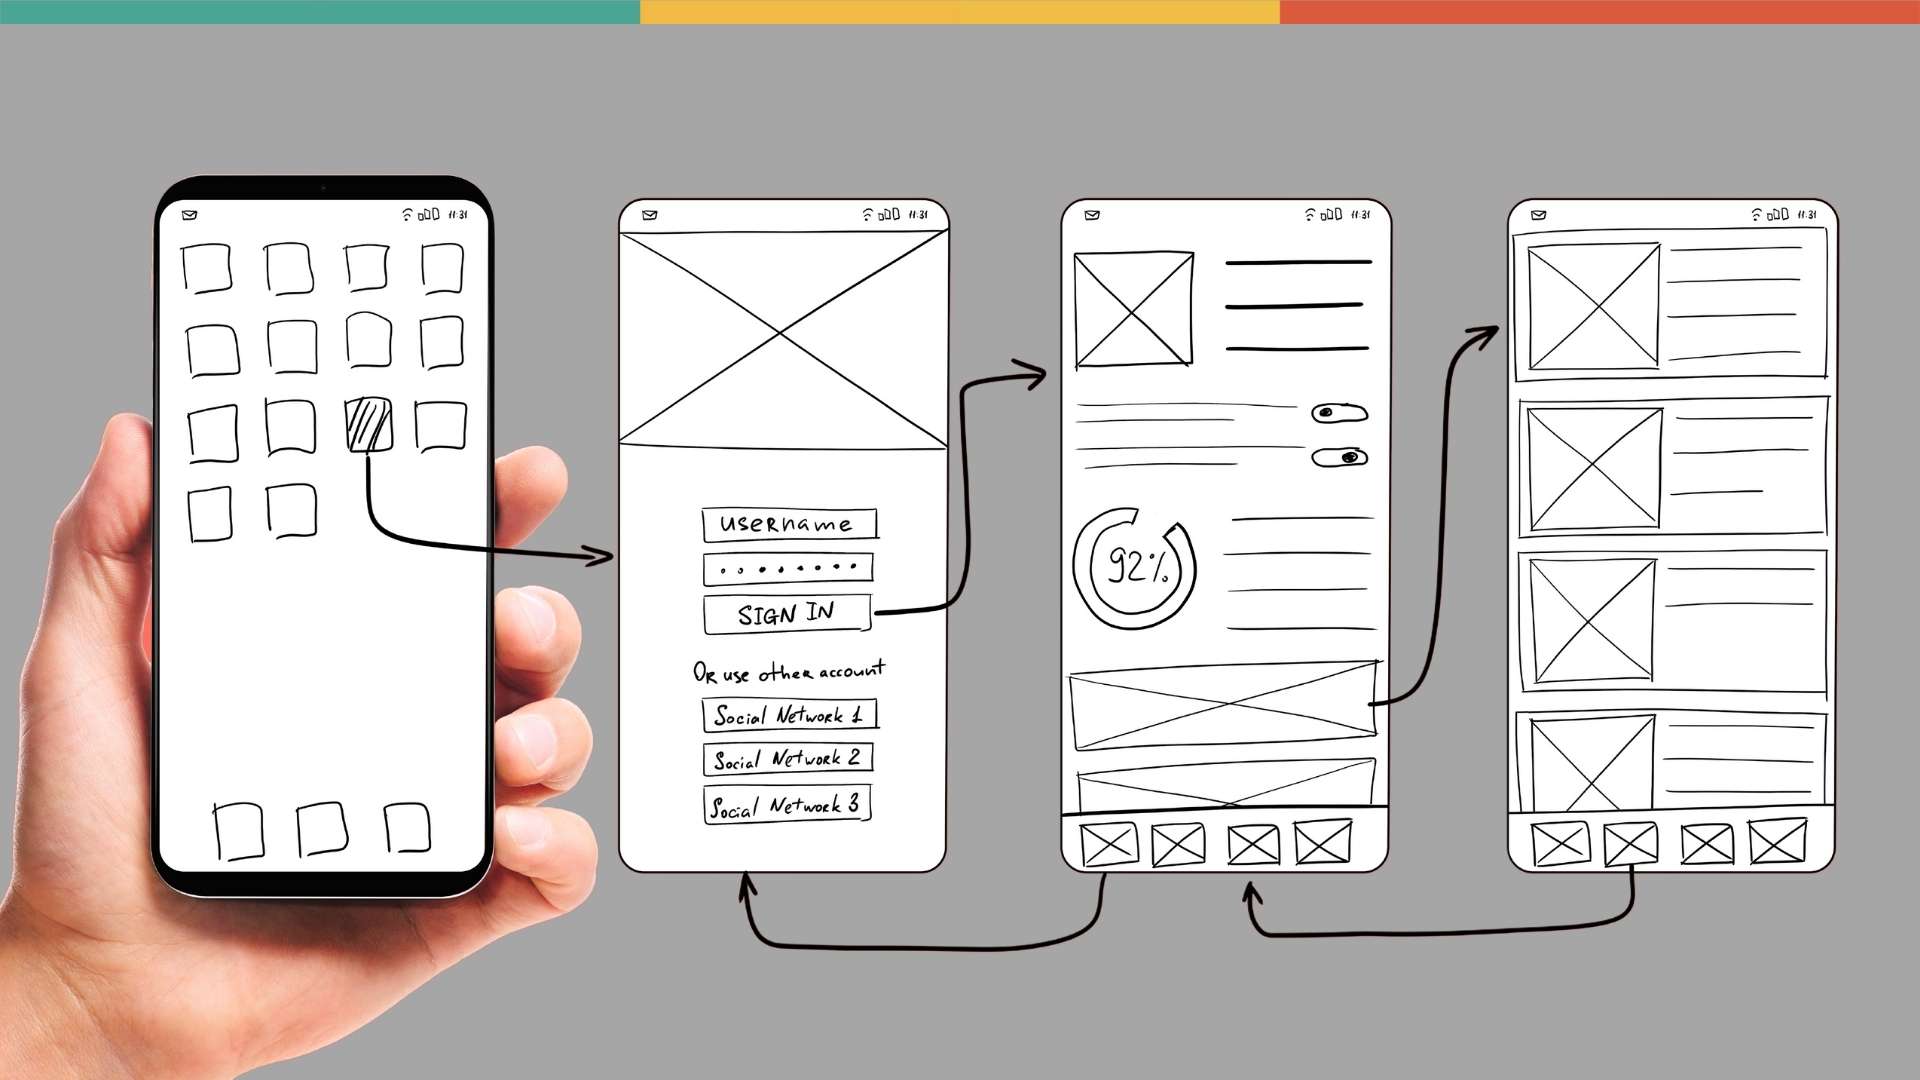 The Process of Mobile App Design: From Ideation to Wireframing